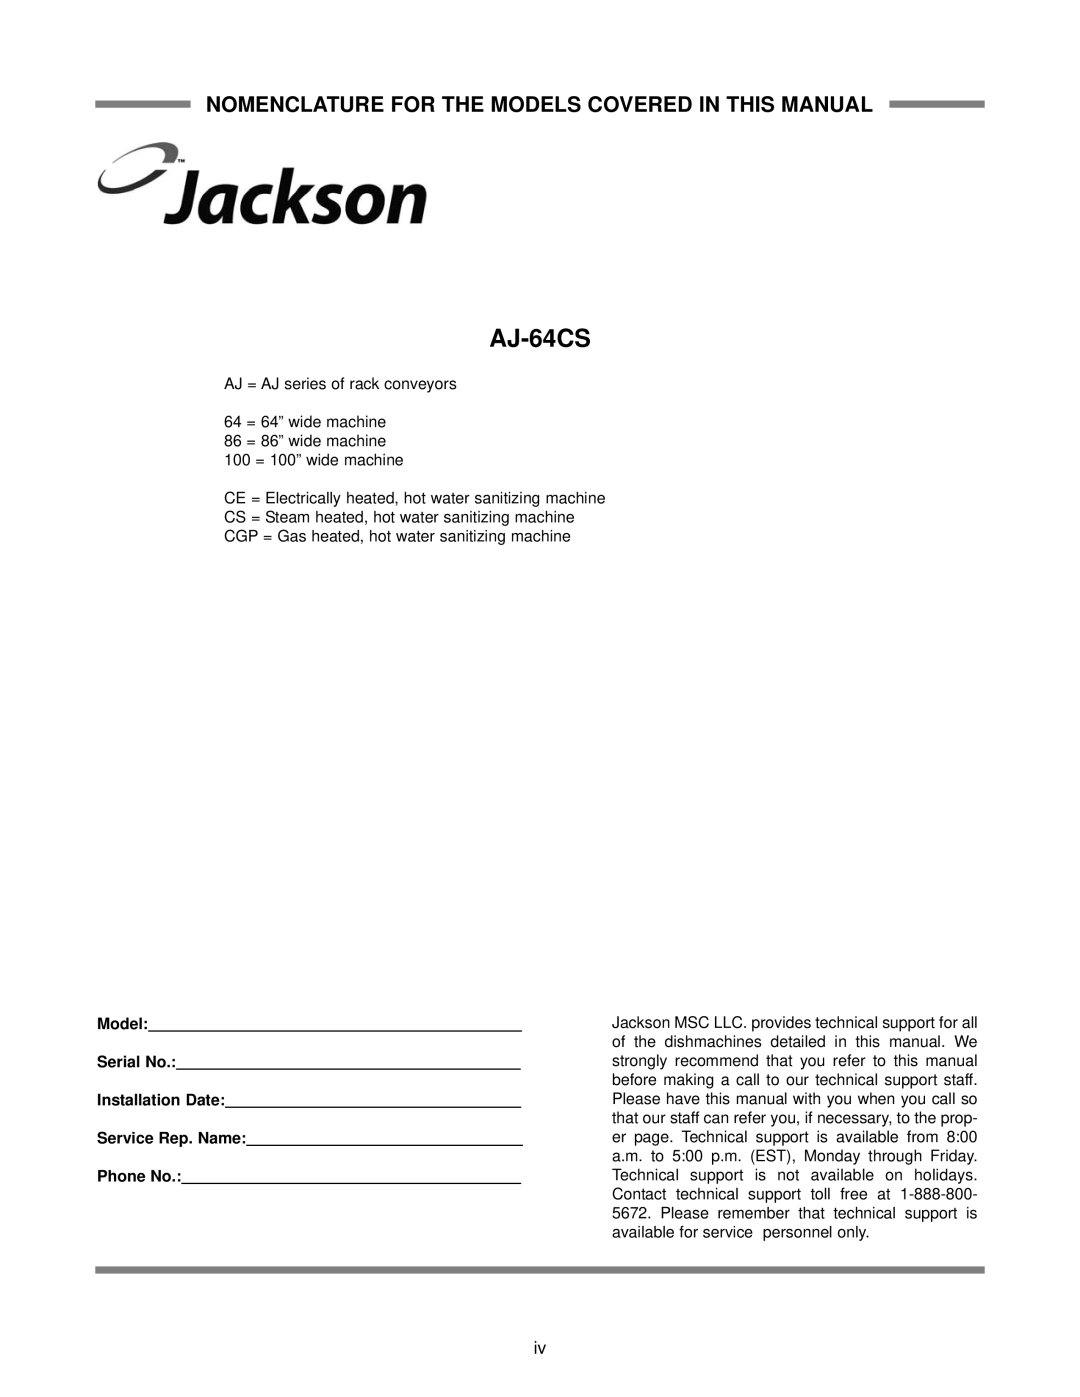 Jackson AJ-100CS, AJ-86CGP, AJ-64CE, AJ-86CS, aj-86ce, AJ-100CGP AJ-64CS, Nomenclature For The Models Covered In This Manual 